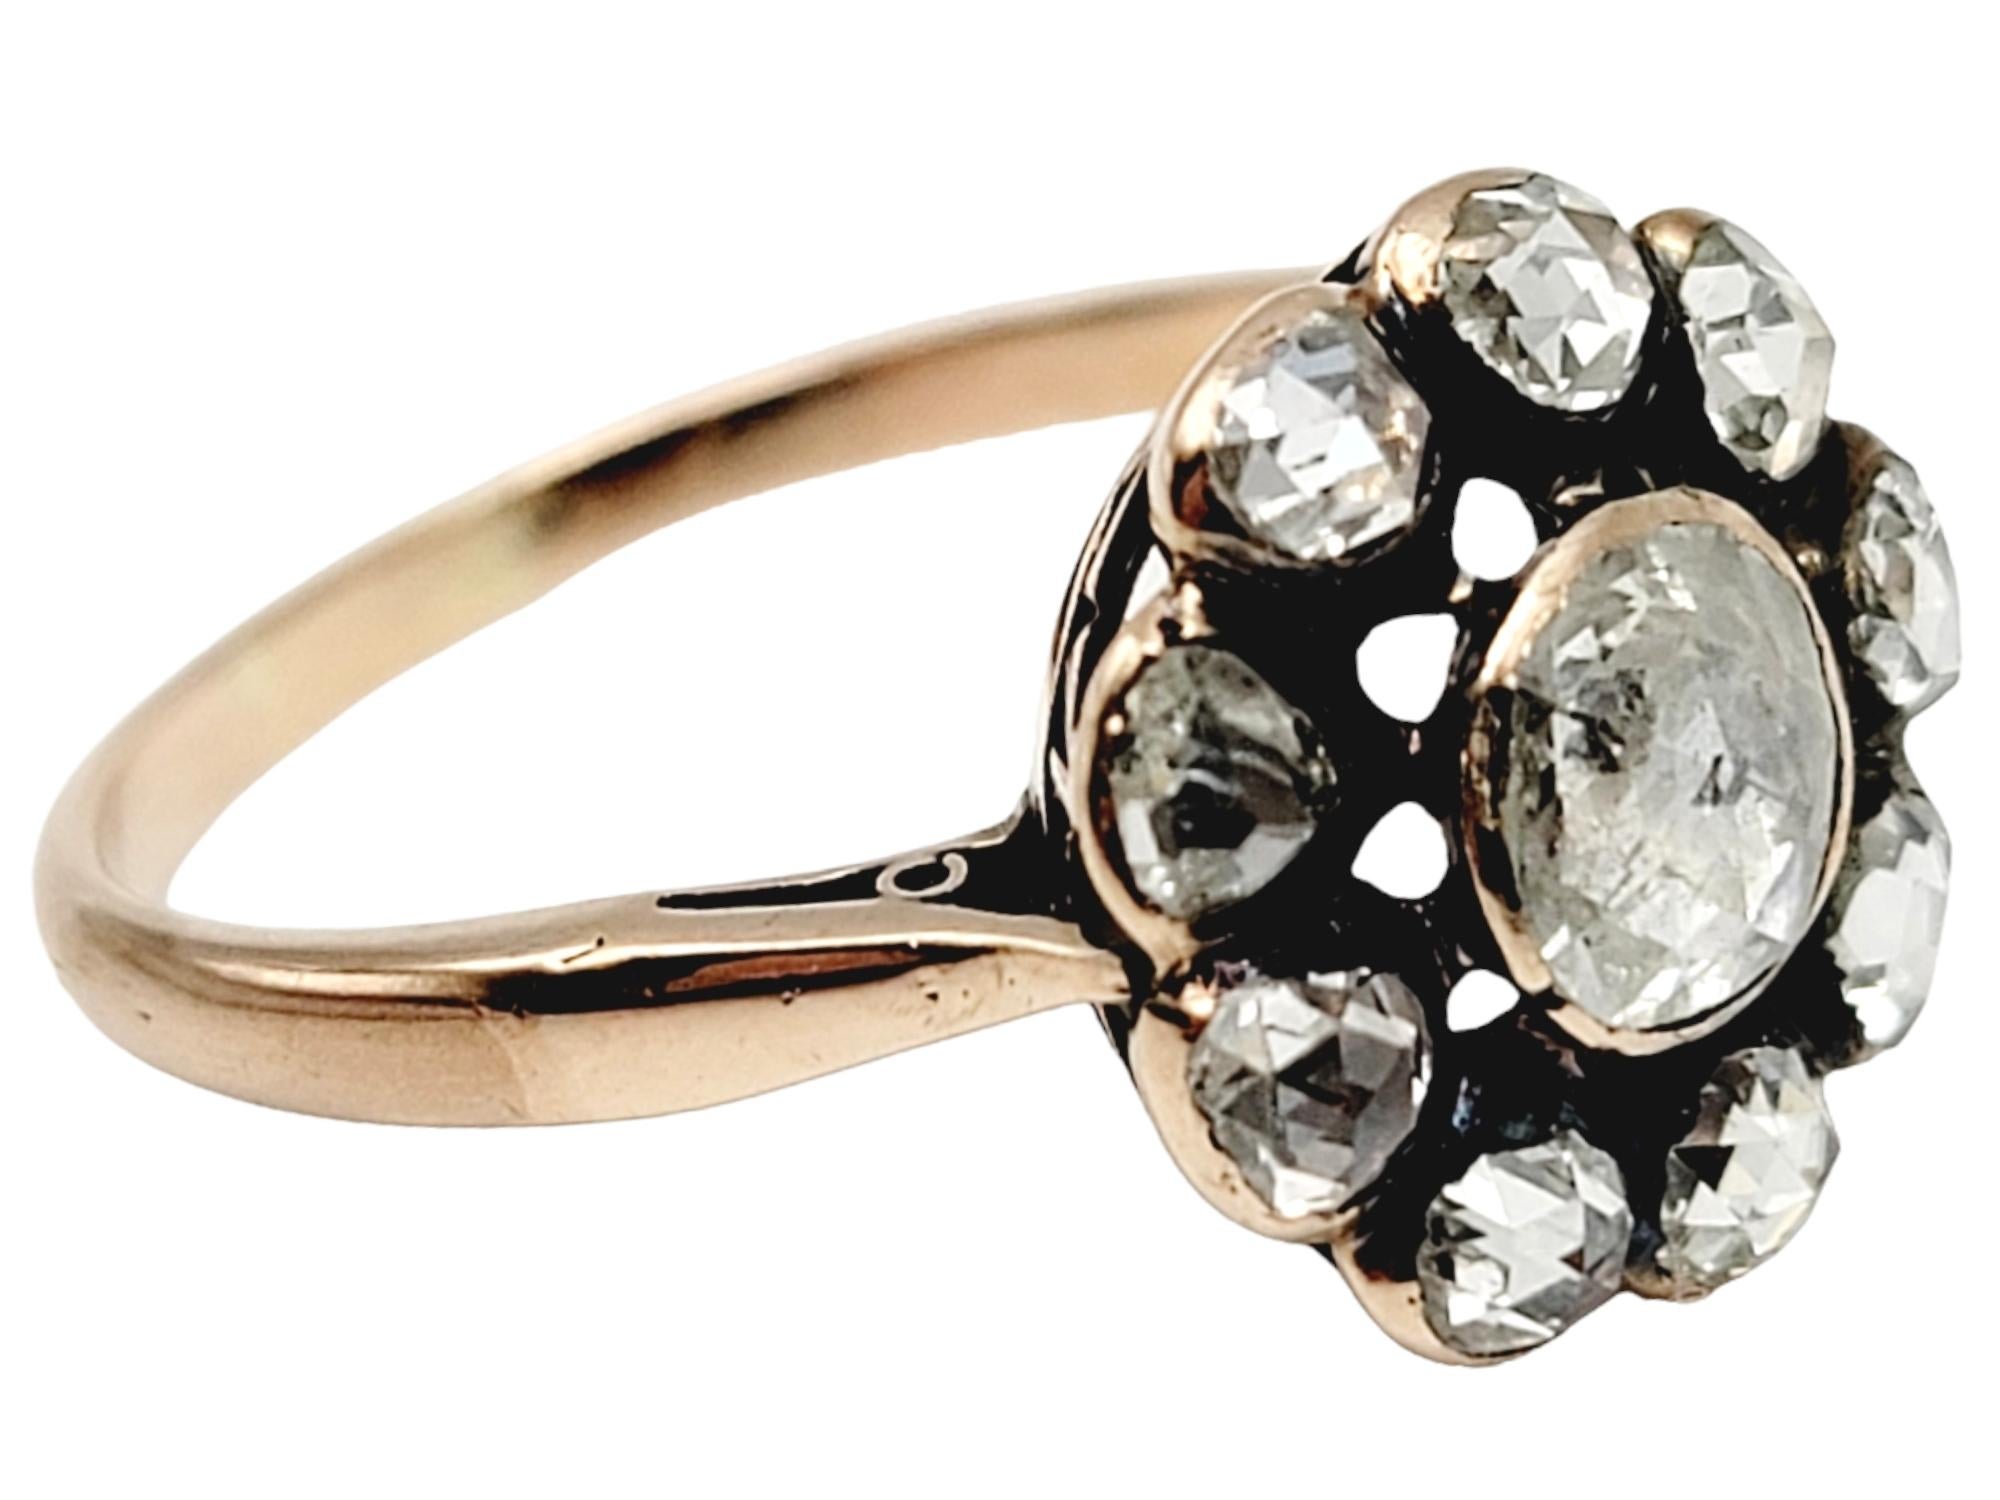 Ring size: 8

Take a trip back in time and discover this incredible vintage rose cut diamond cocktail ring. This dreamy, romantic piece features a sparkling diamond halo surrounding the gorgeous faceted center stone.  Offset by a delicate shank, the